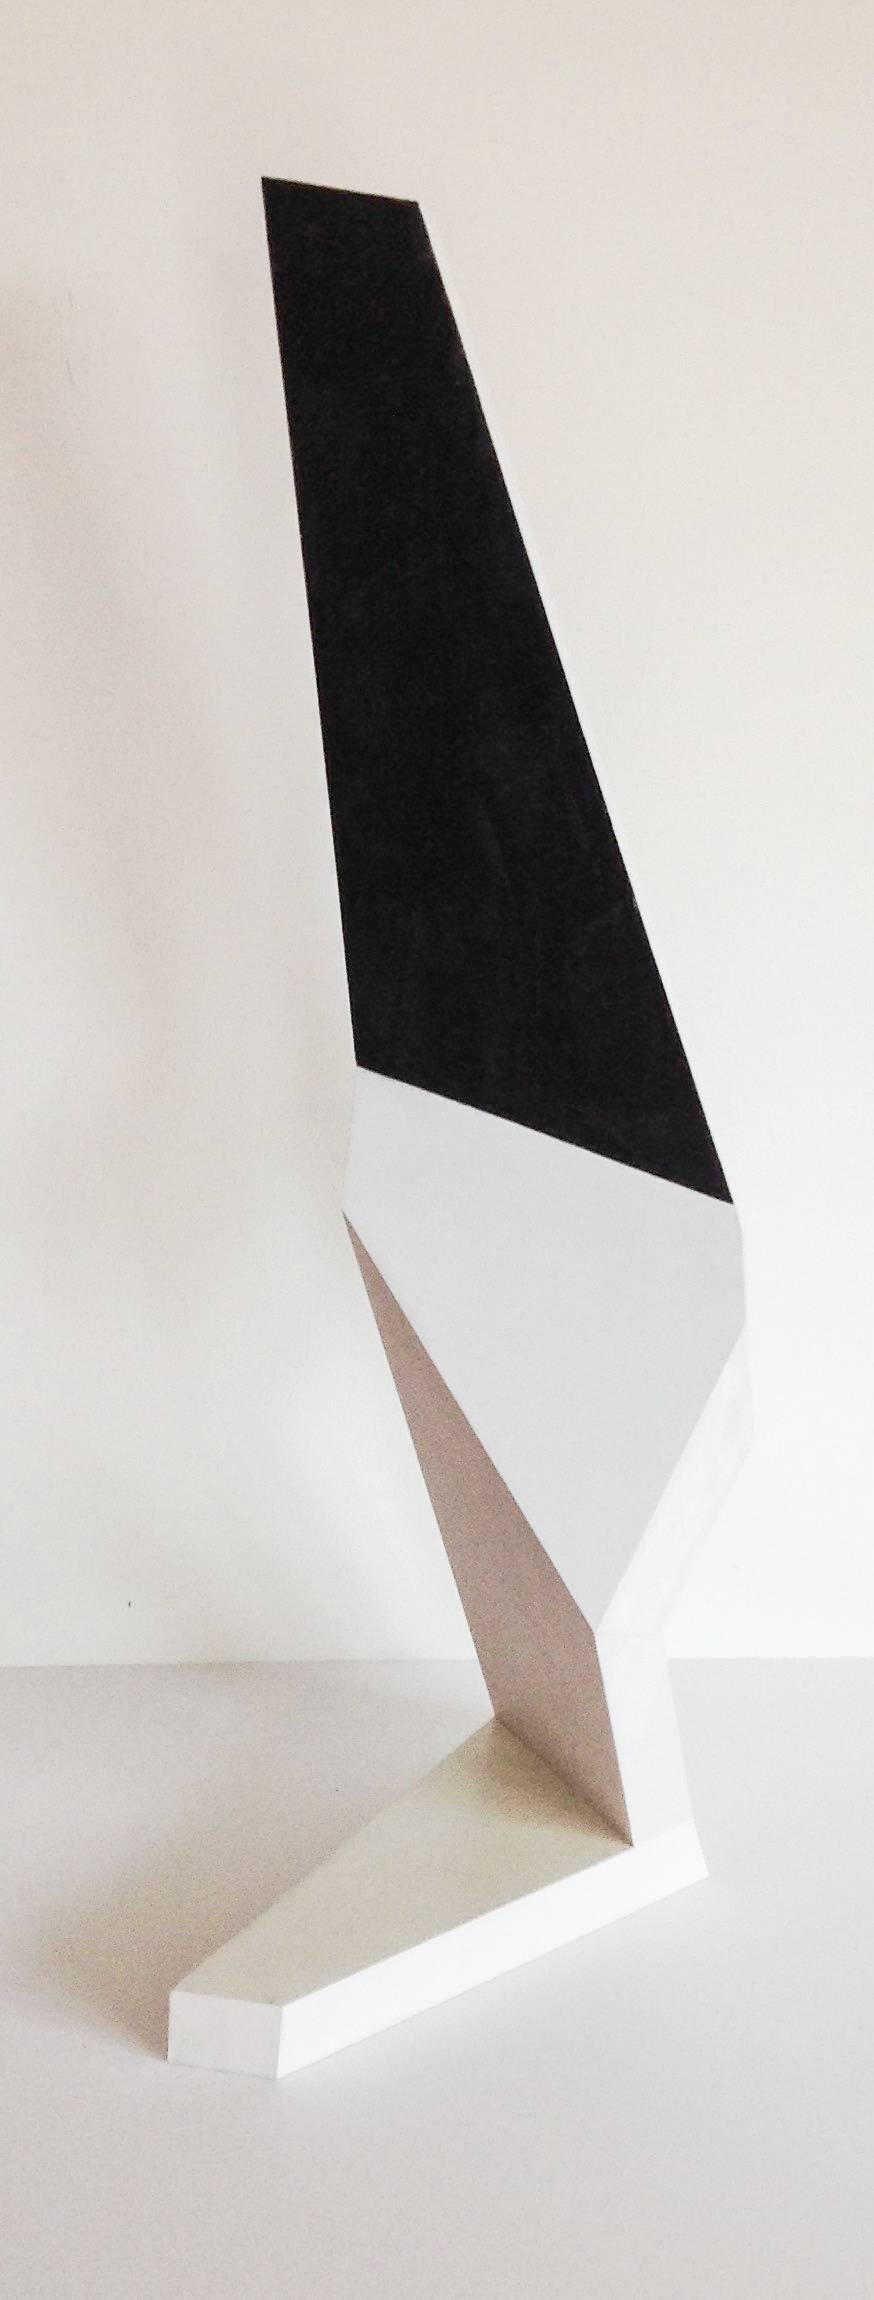 Dai Ban Abstract Sculpture - Kneeling Figure (Modern Abstract Minimalist Standing Sculpture in White & Black)